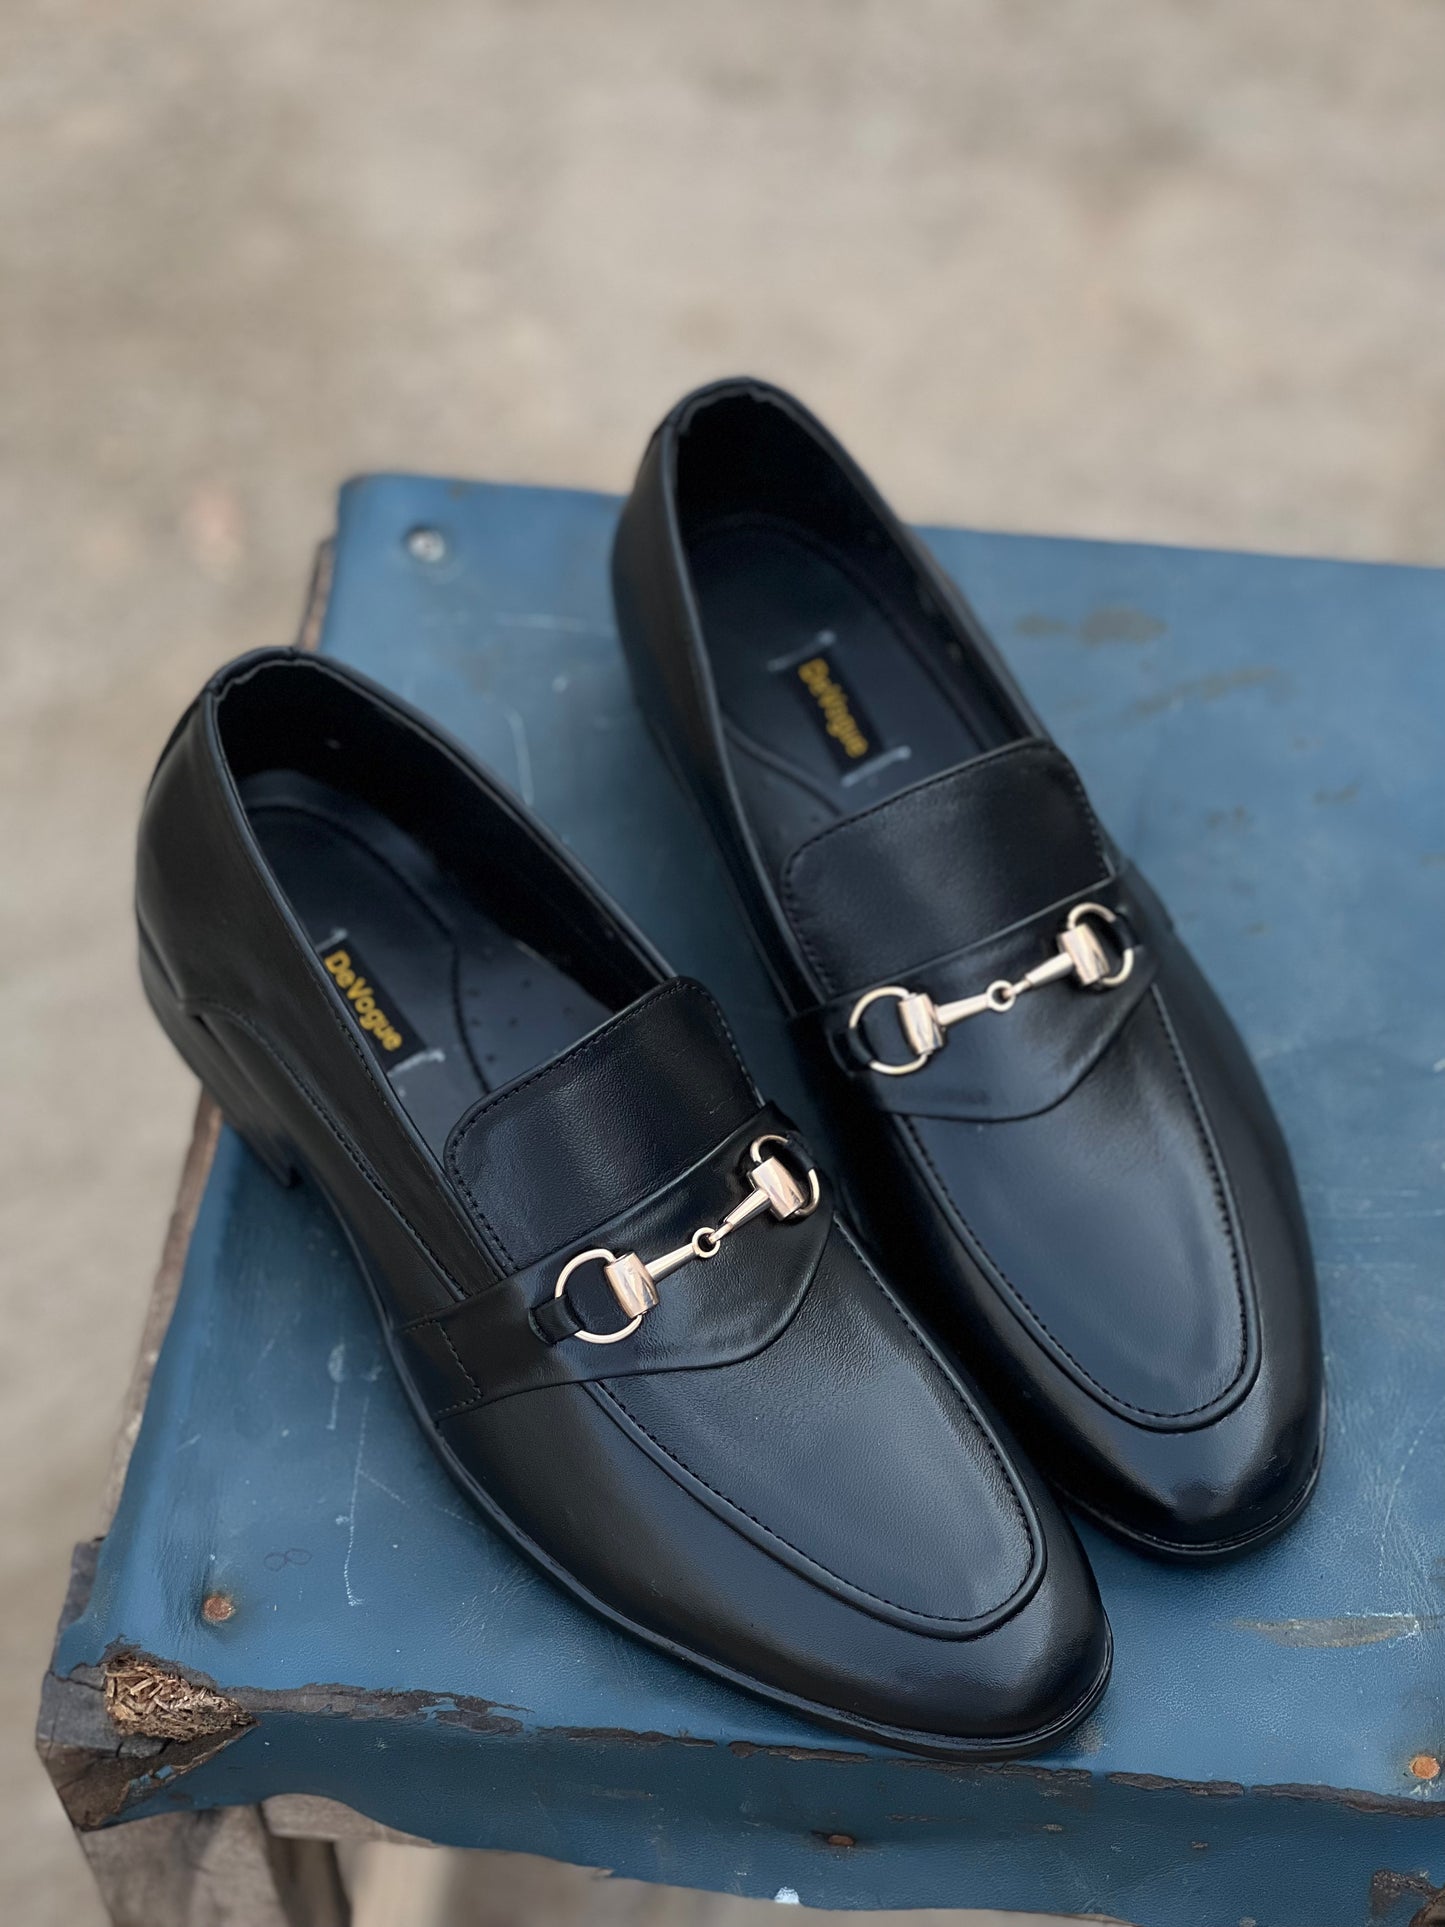 4003-Black Cow Leather Formal Loafer Style in Rubber sole